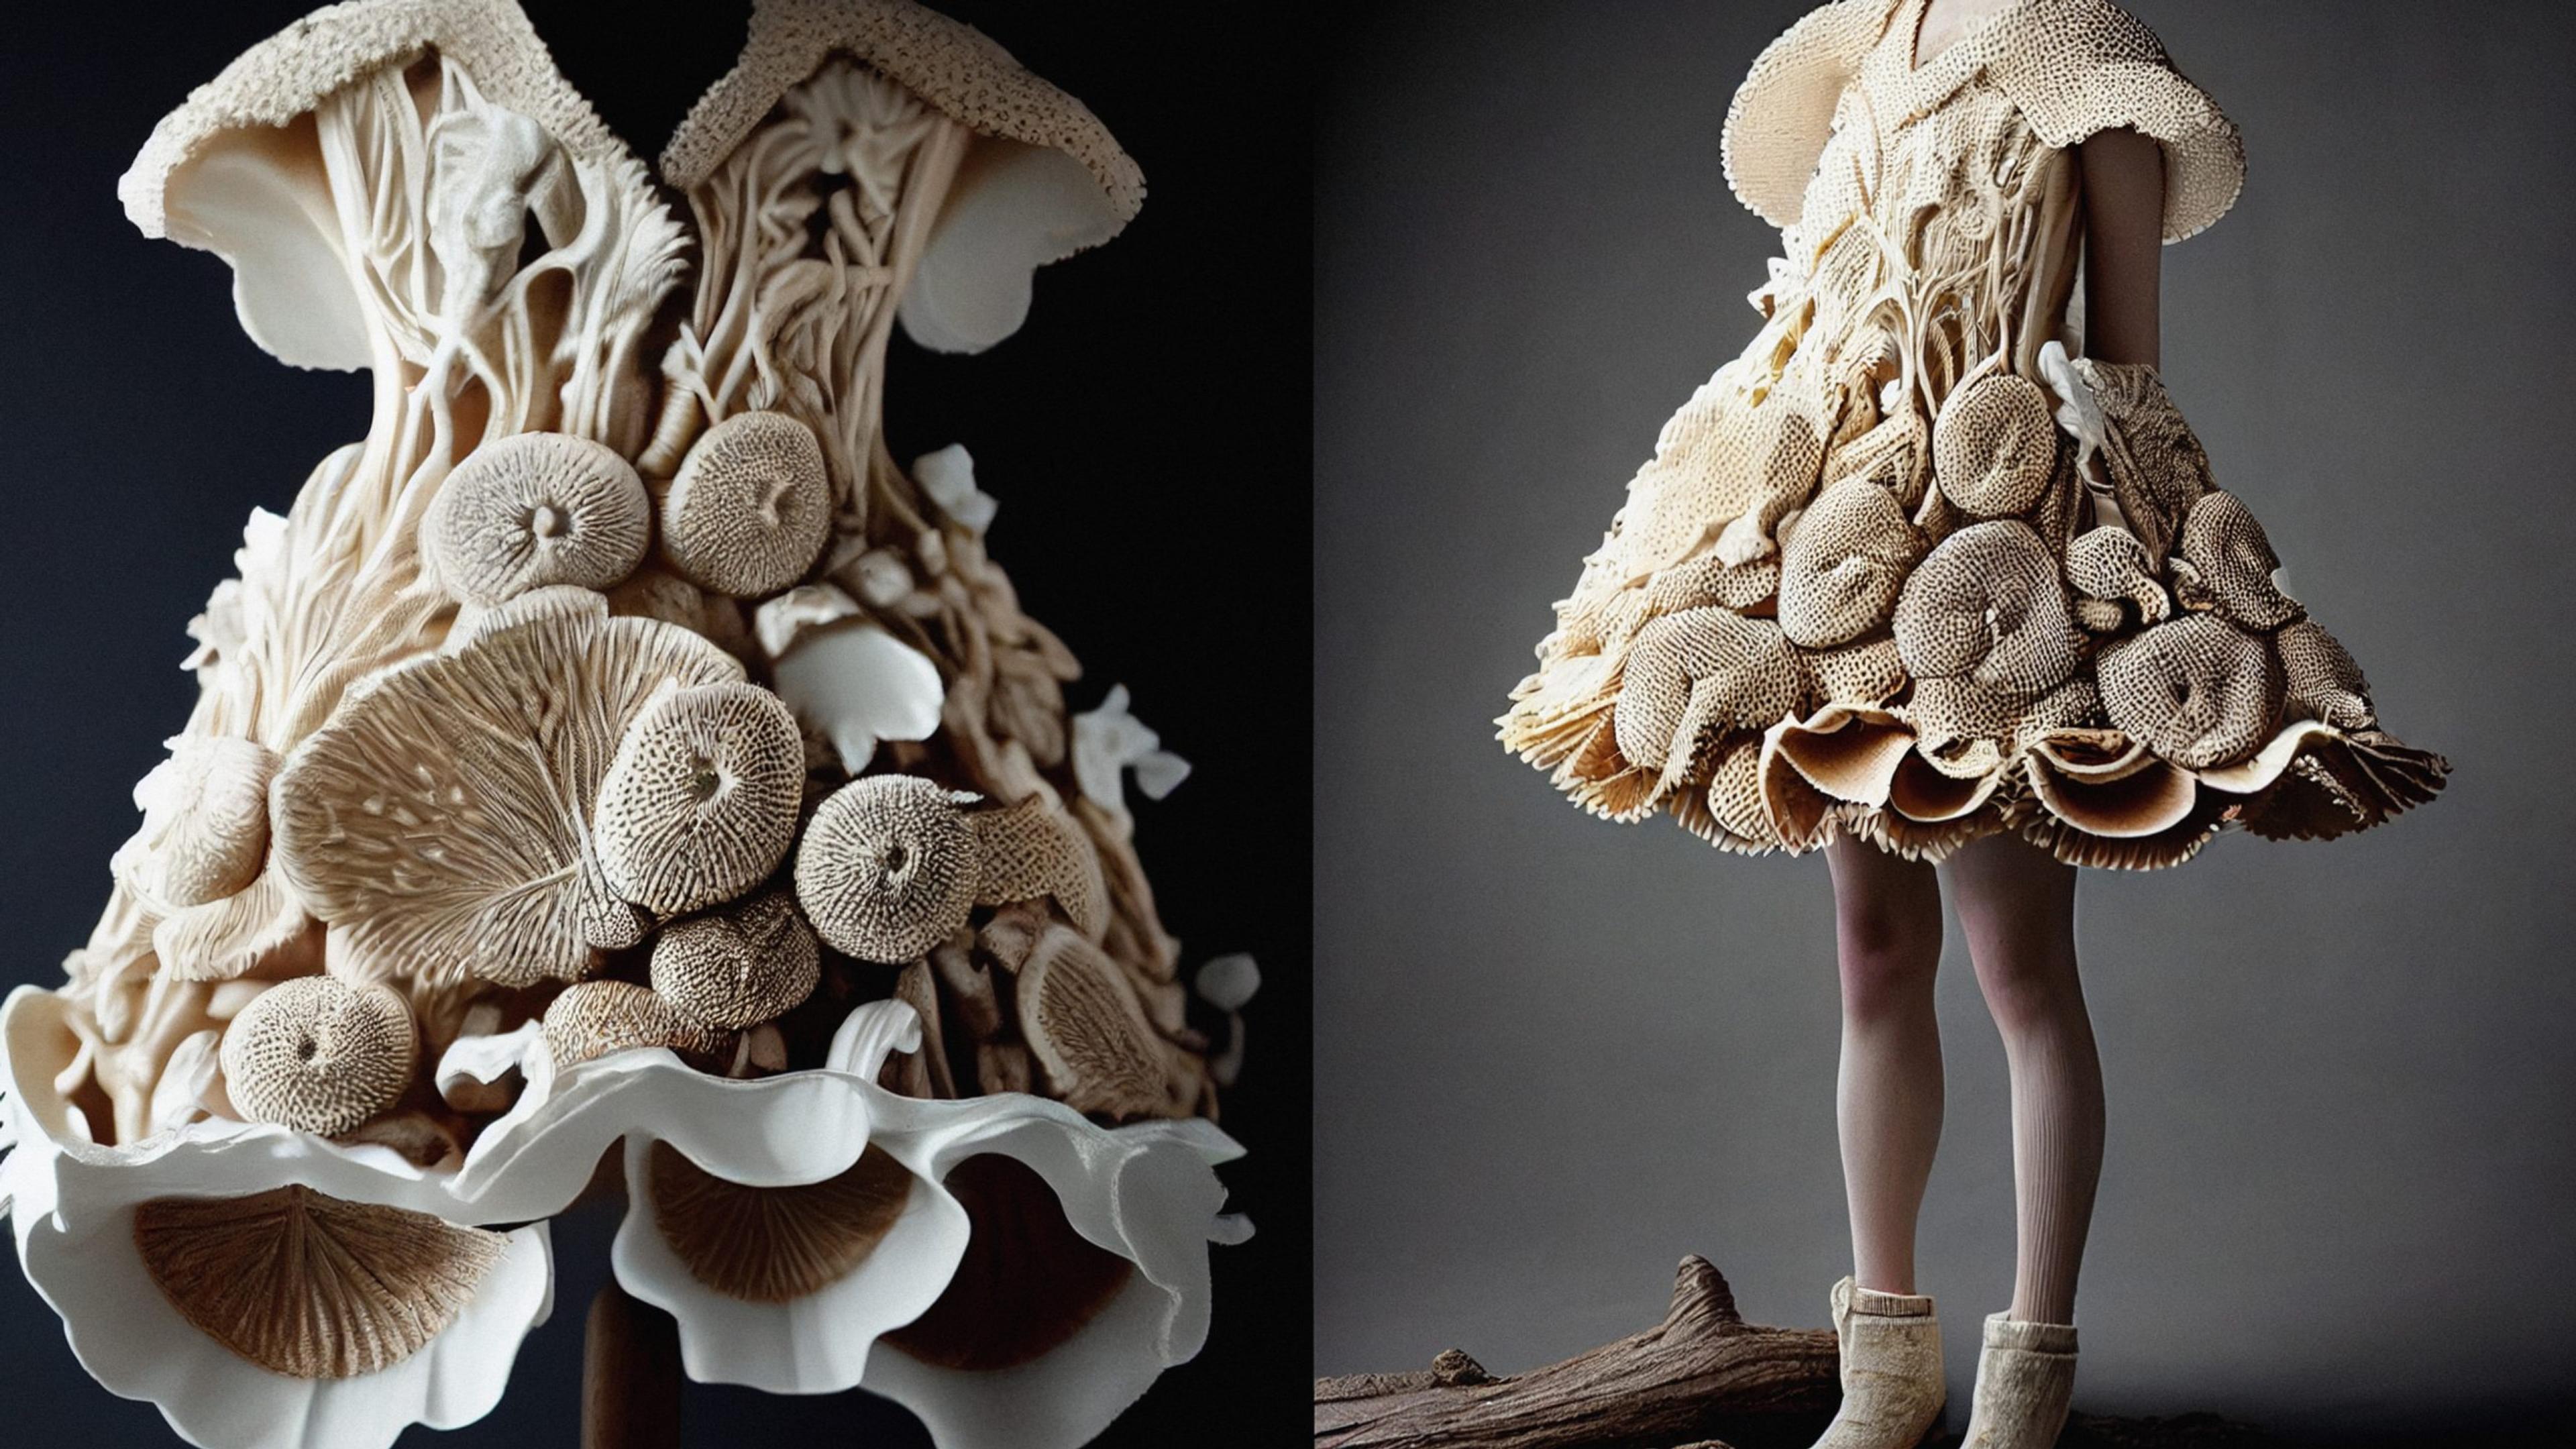 Made by using artificial intelligence / "I dream about a dress made of edible fungi"